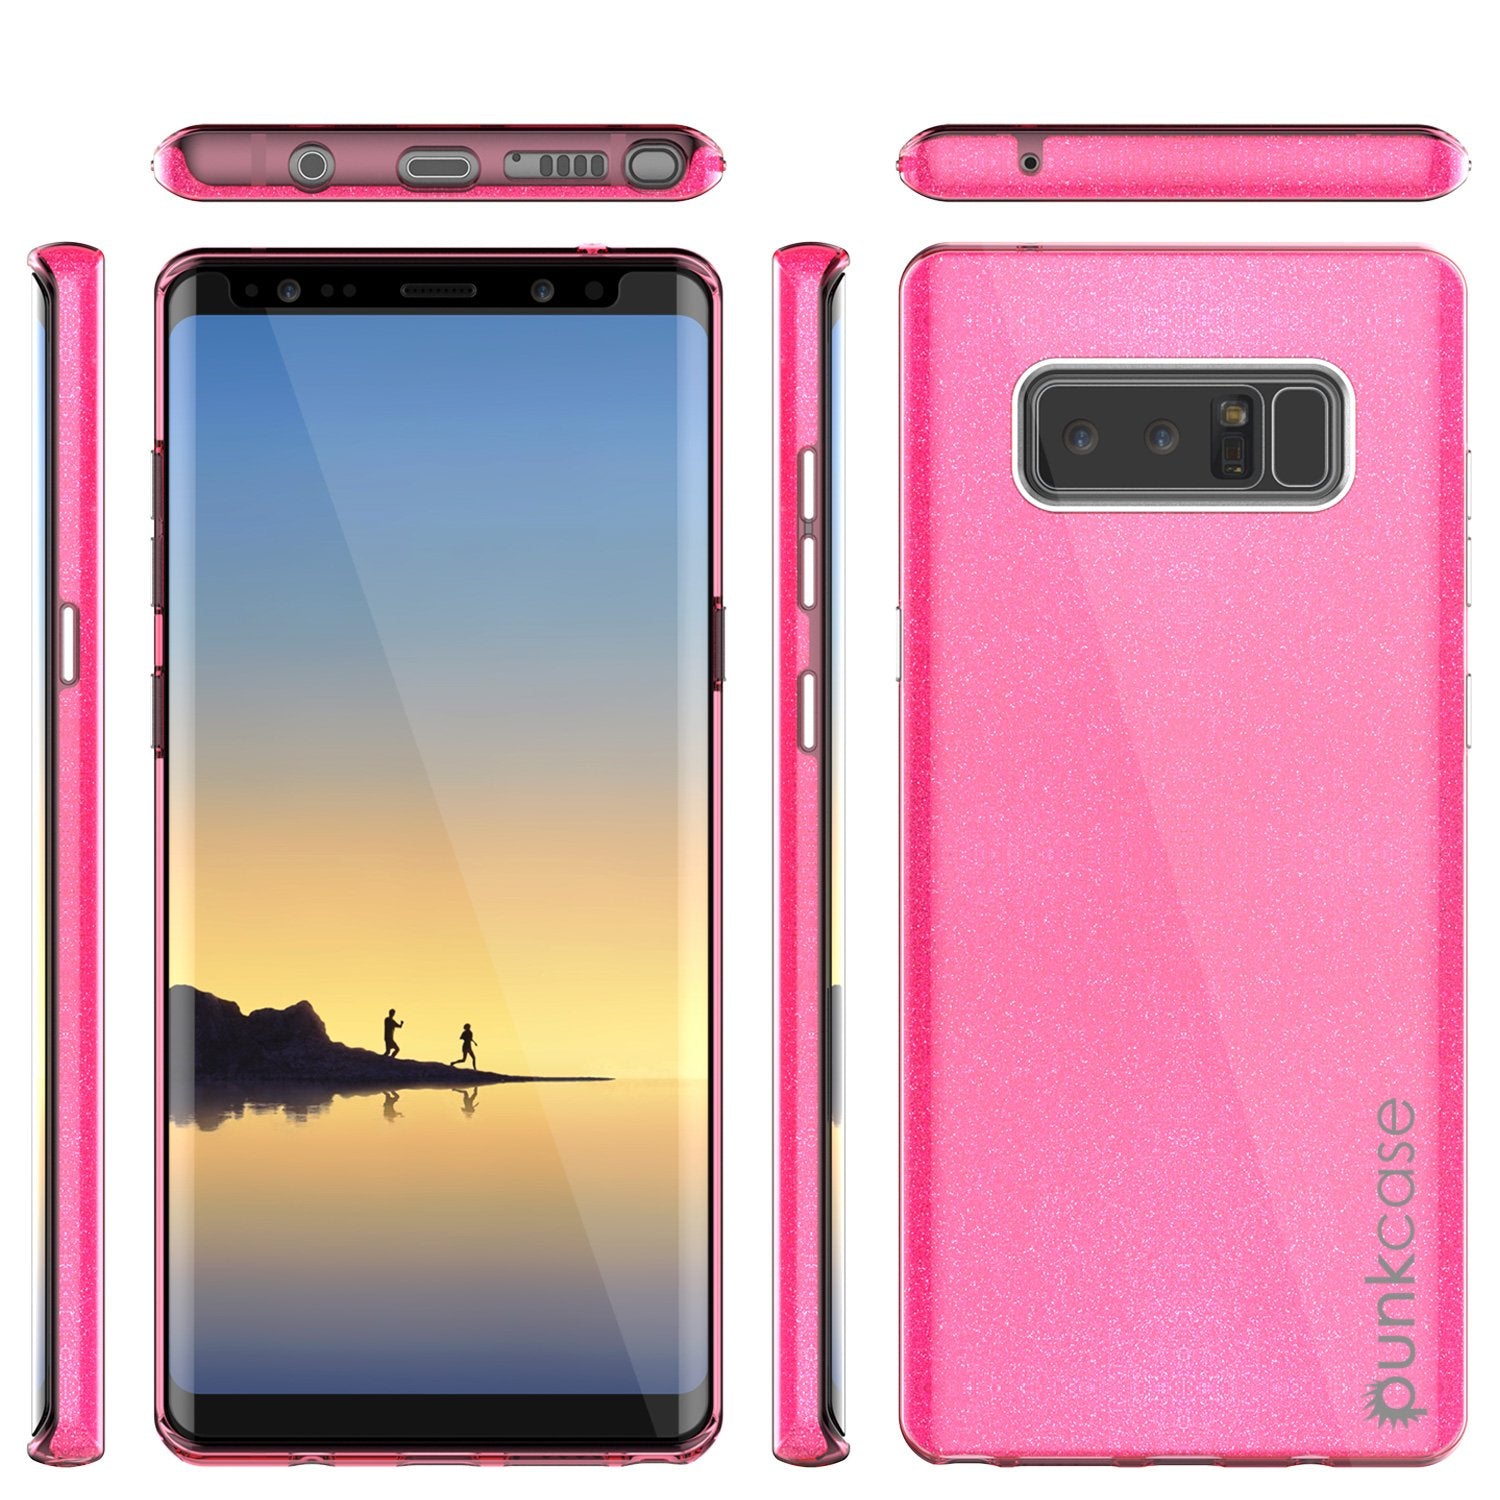 Galaxy Note 8 Case, Punkcase Galactic 2.0 Series Ultra Slim Protective Armor [Pink]